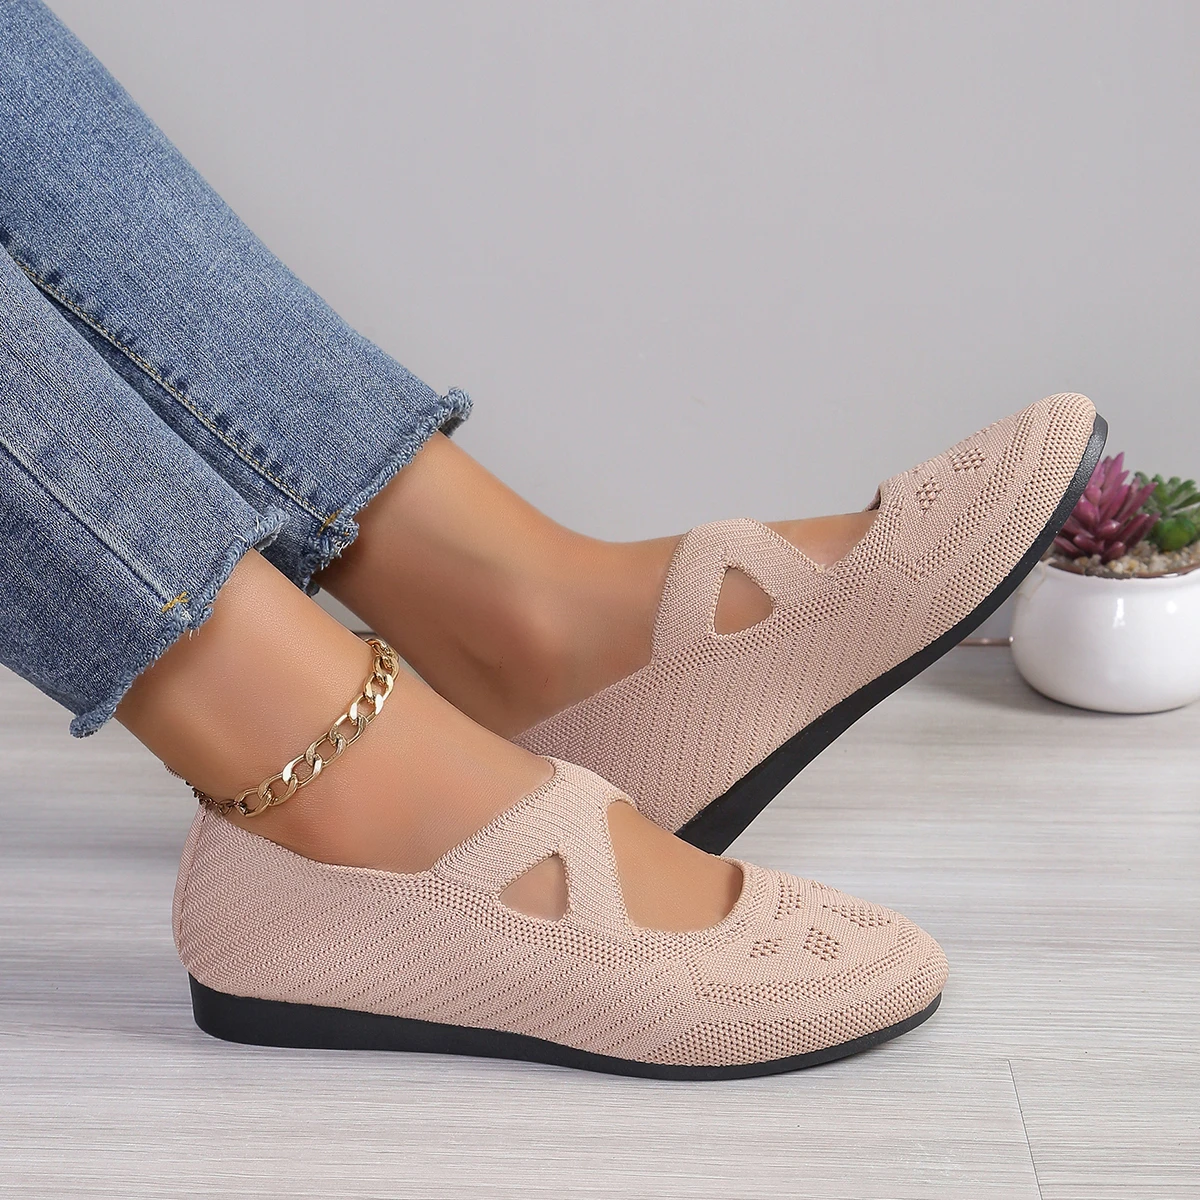 

Women Flats Pointed Toe Solid Color Knitted Slip on Shoes Casual Breathable Ballet Flats Women Shoes Loafers Zapatos De Mujer